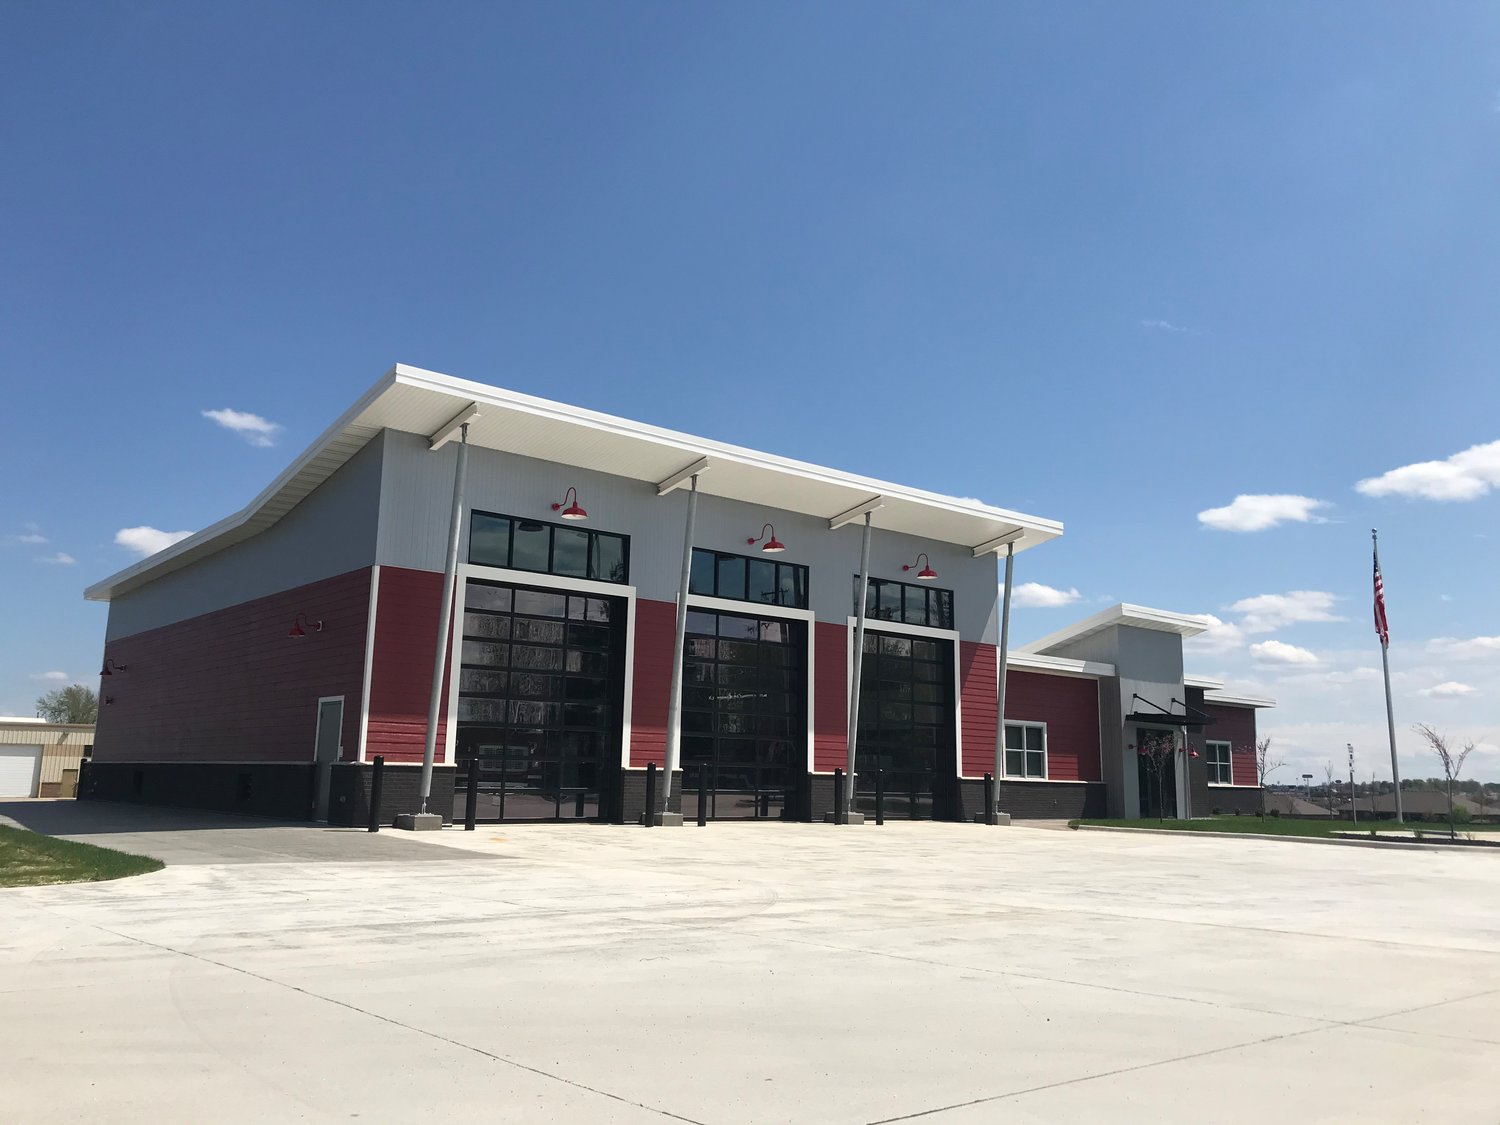 Work was completed earlier this year on the $1.7 million Ozark Fire Protection District Station No. 2, at 6051 N. Cabinet Drive in Ozark.